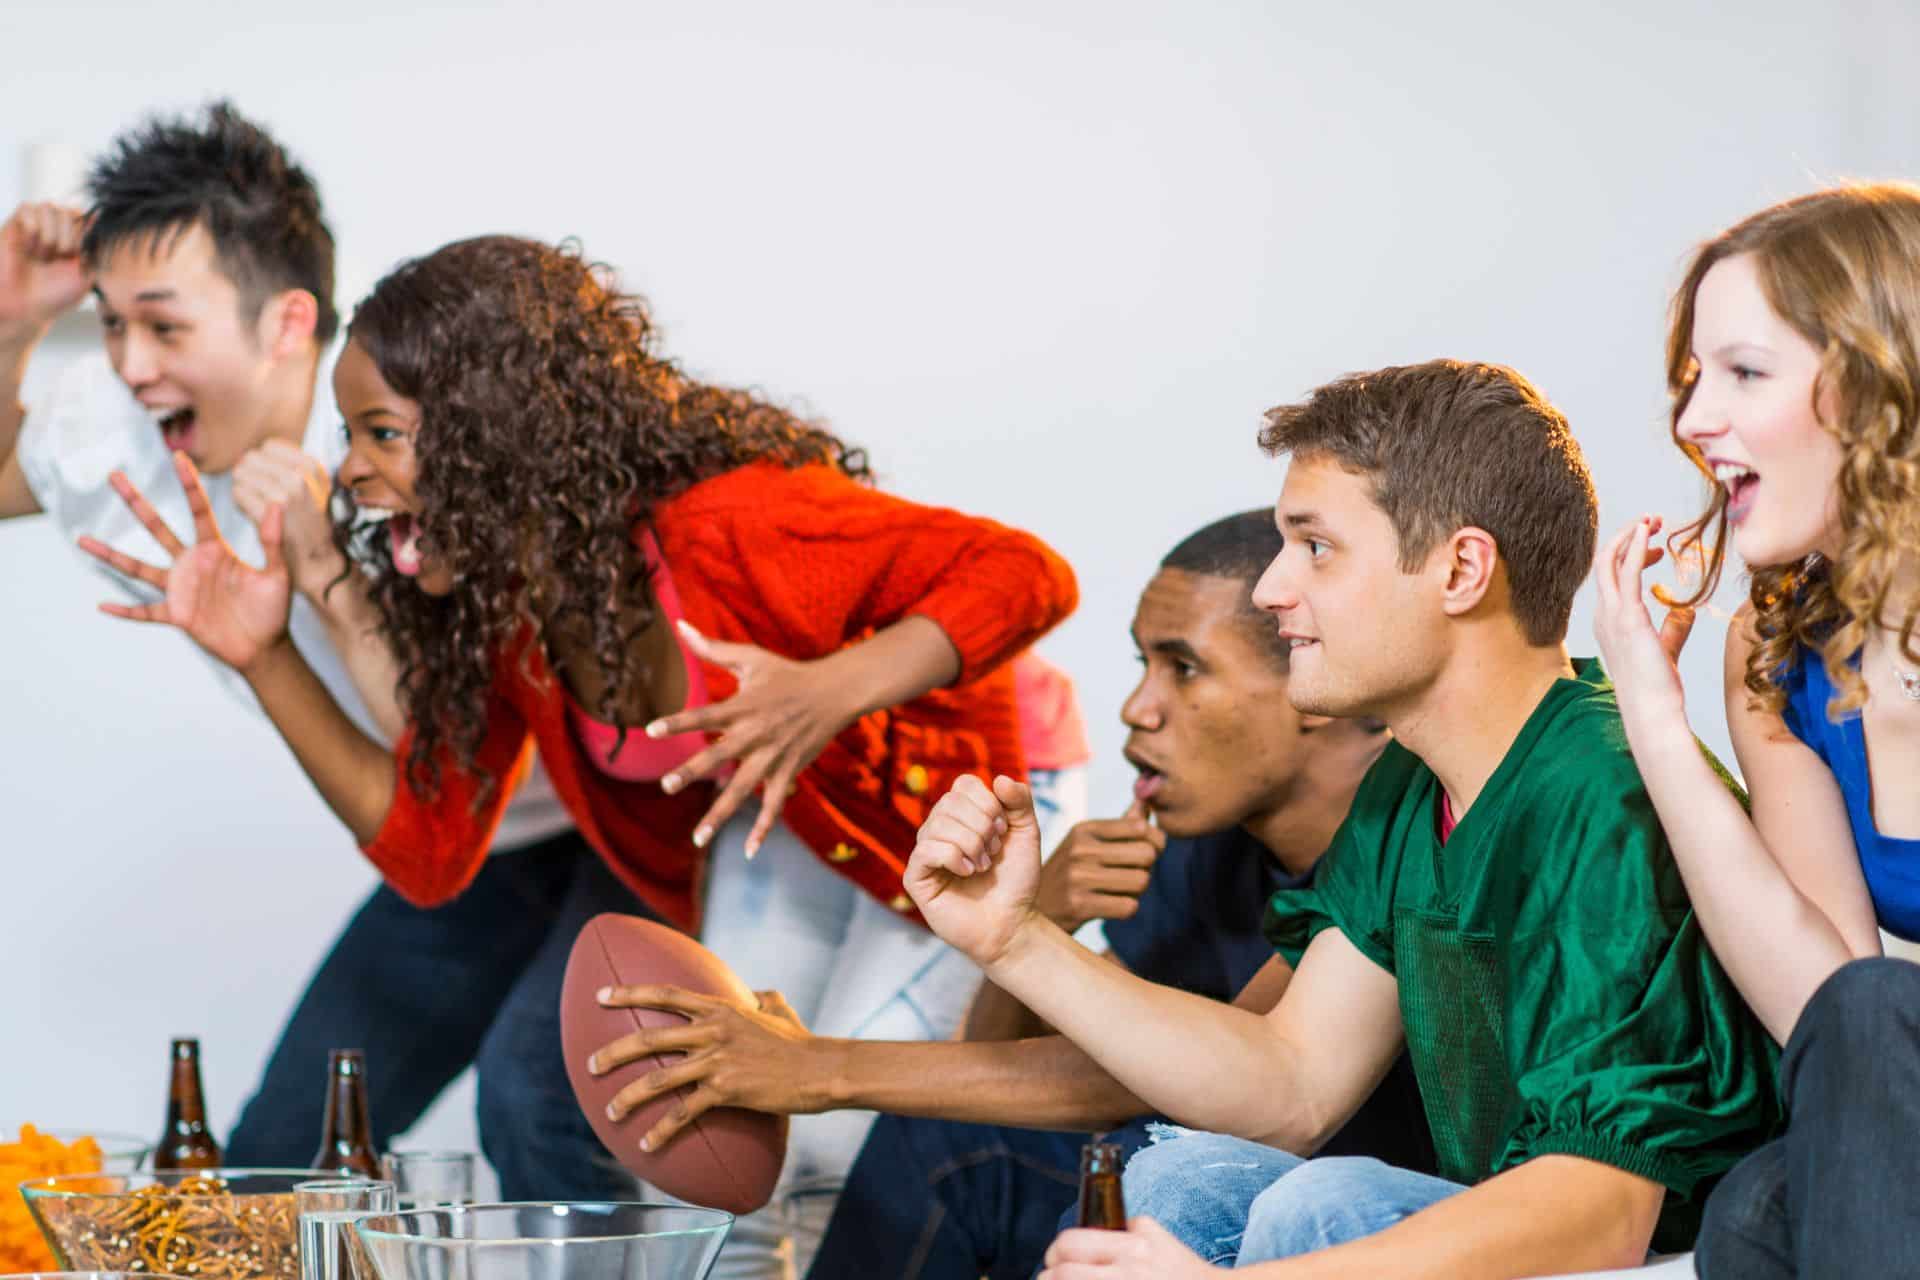 8 Ideas to Make This Yr’s Super Bowl Home Party Epic